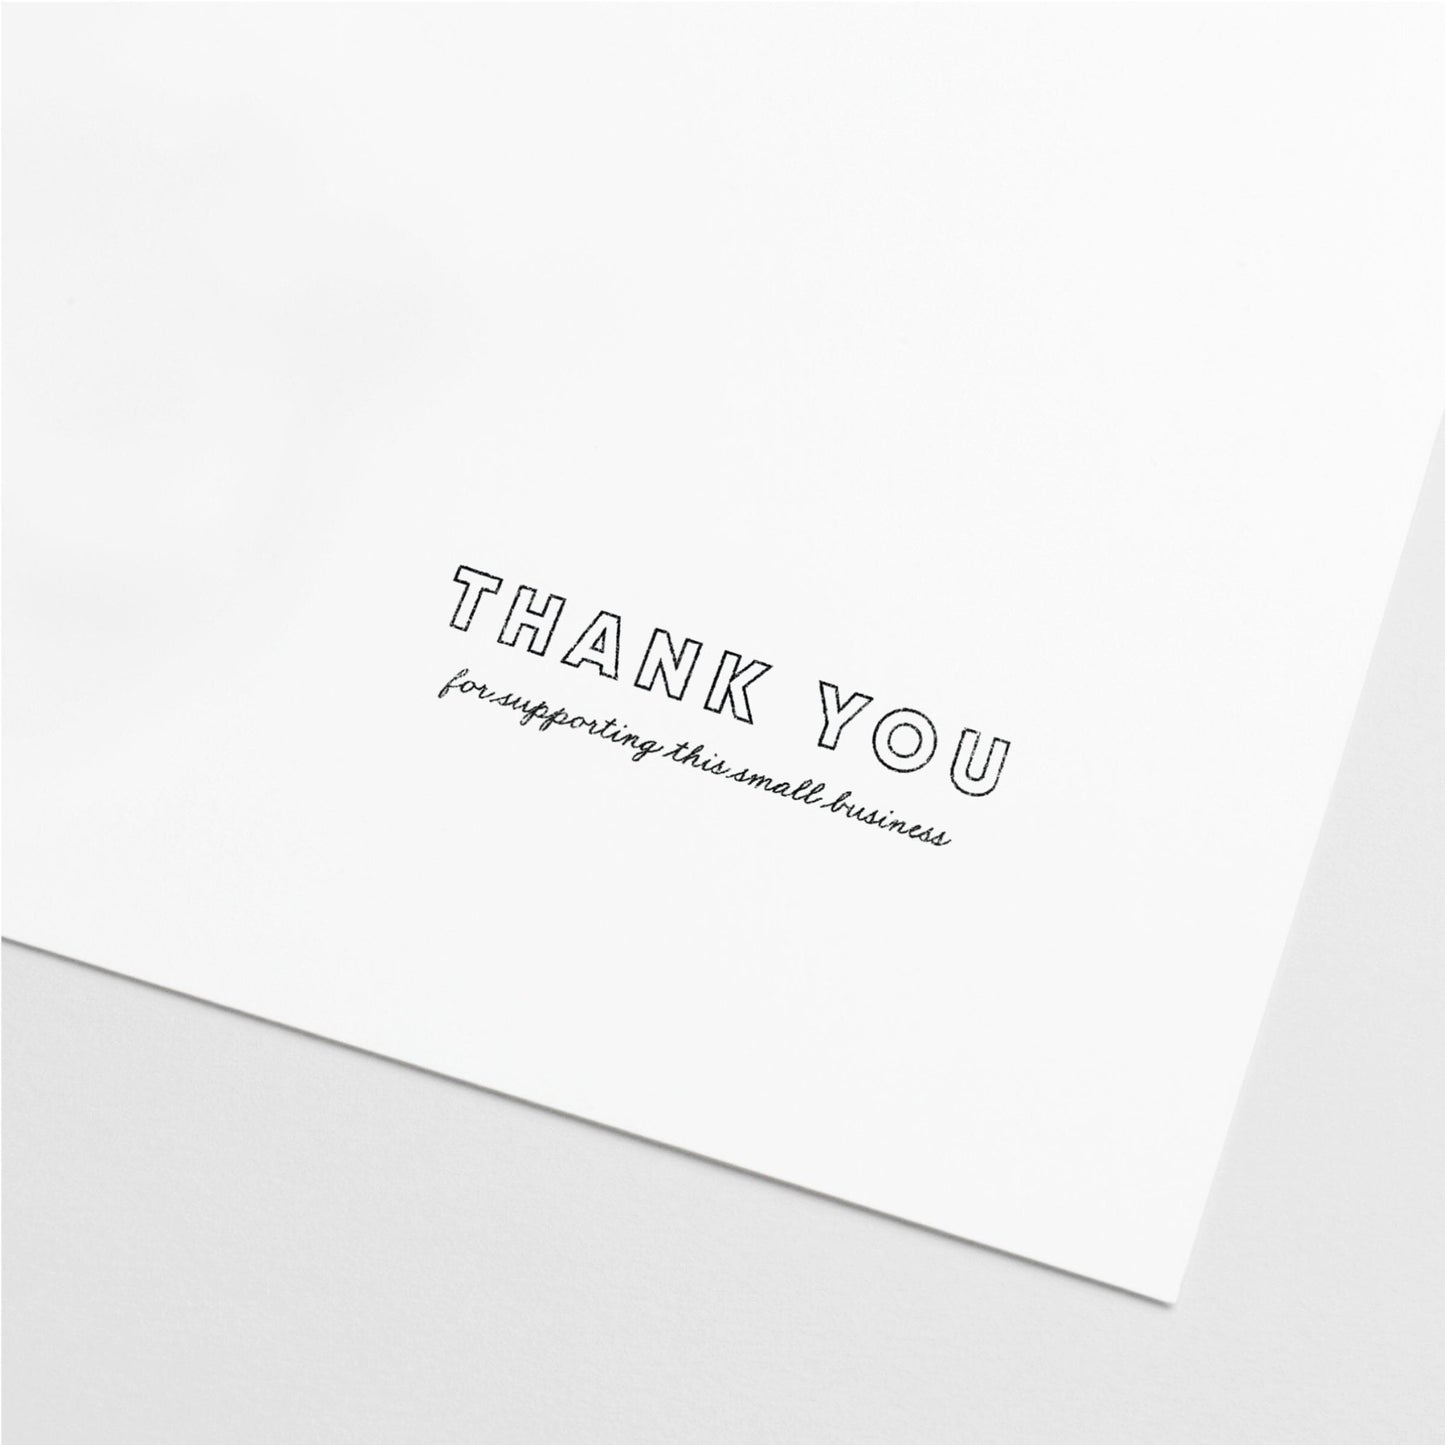 Thank You Stamp, Business Stamper The Design Craft